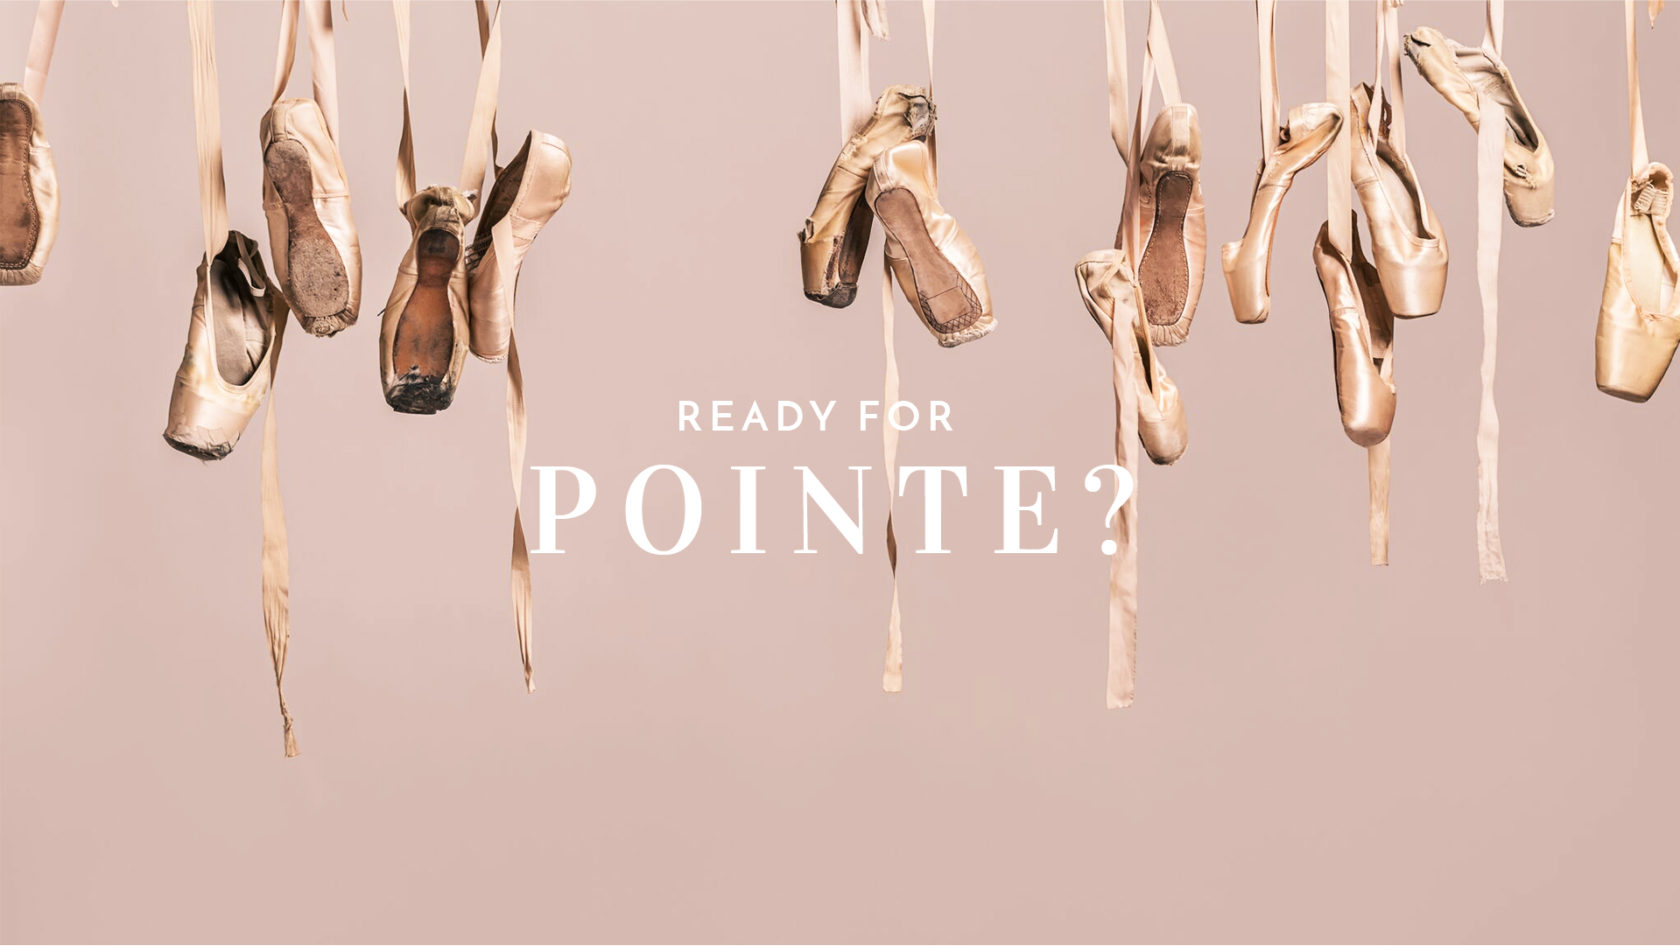 Ready for Pointe?